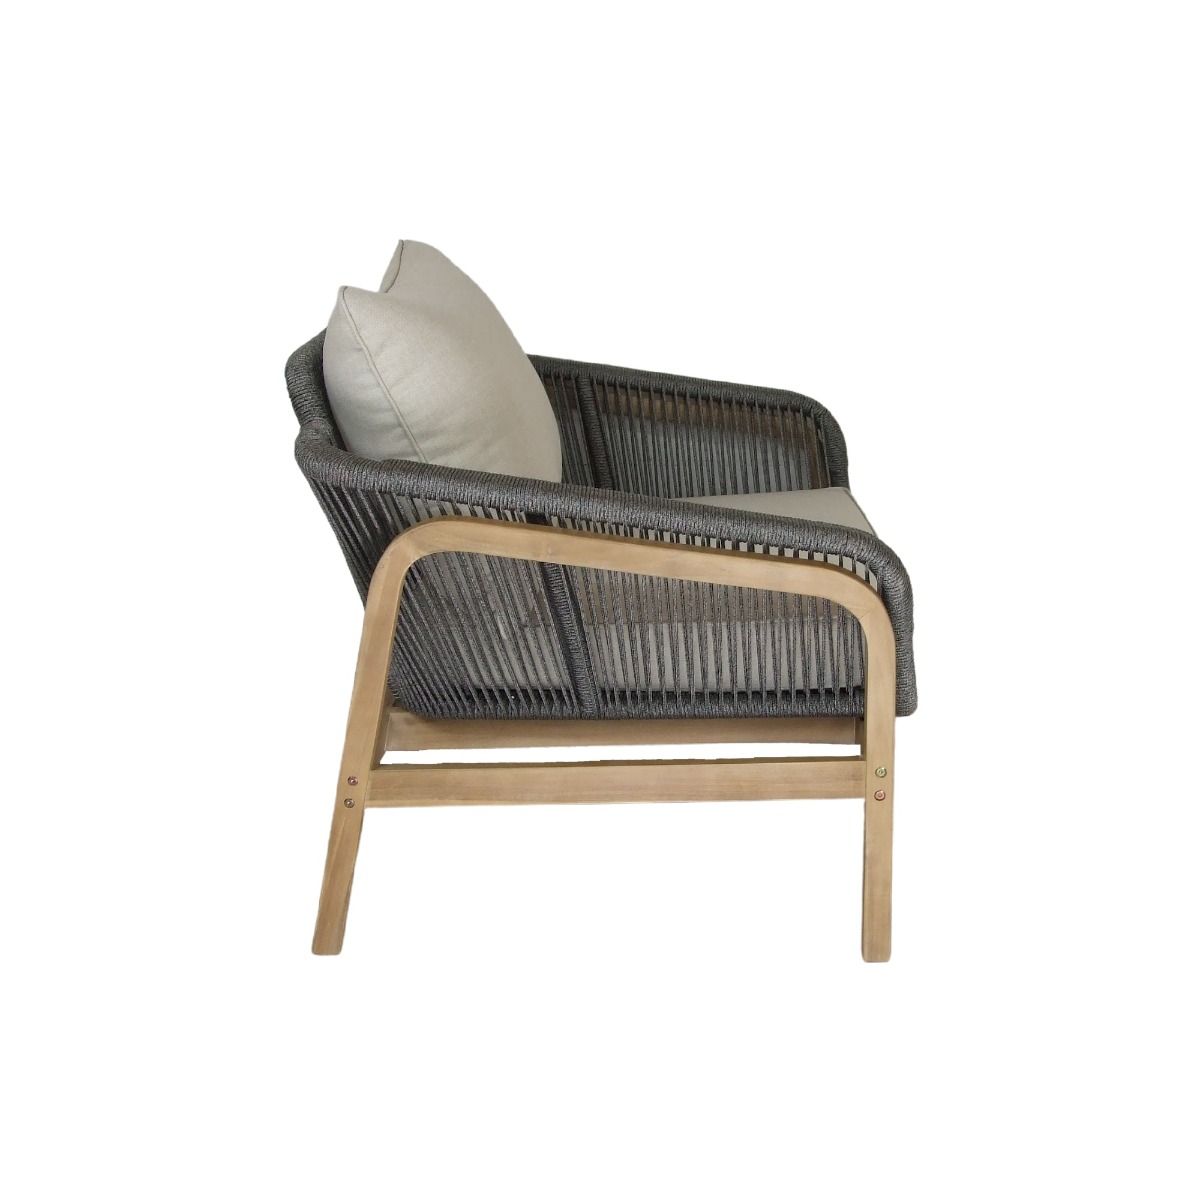 CR Cameo Solid Timber 3 Seater Outdoor Lounge